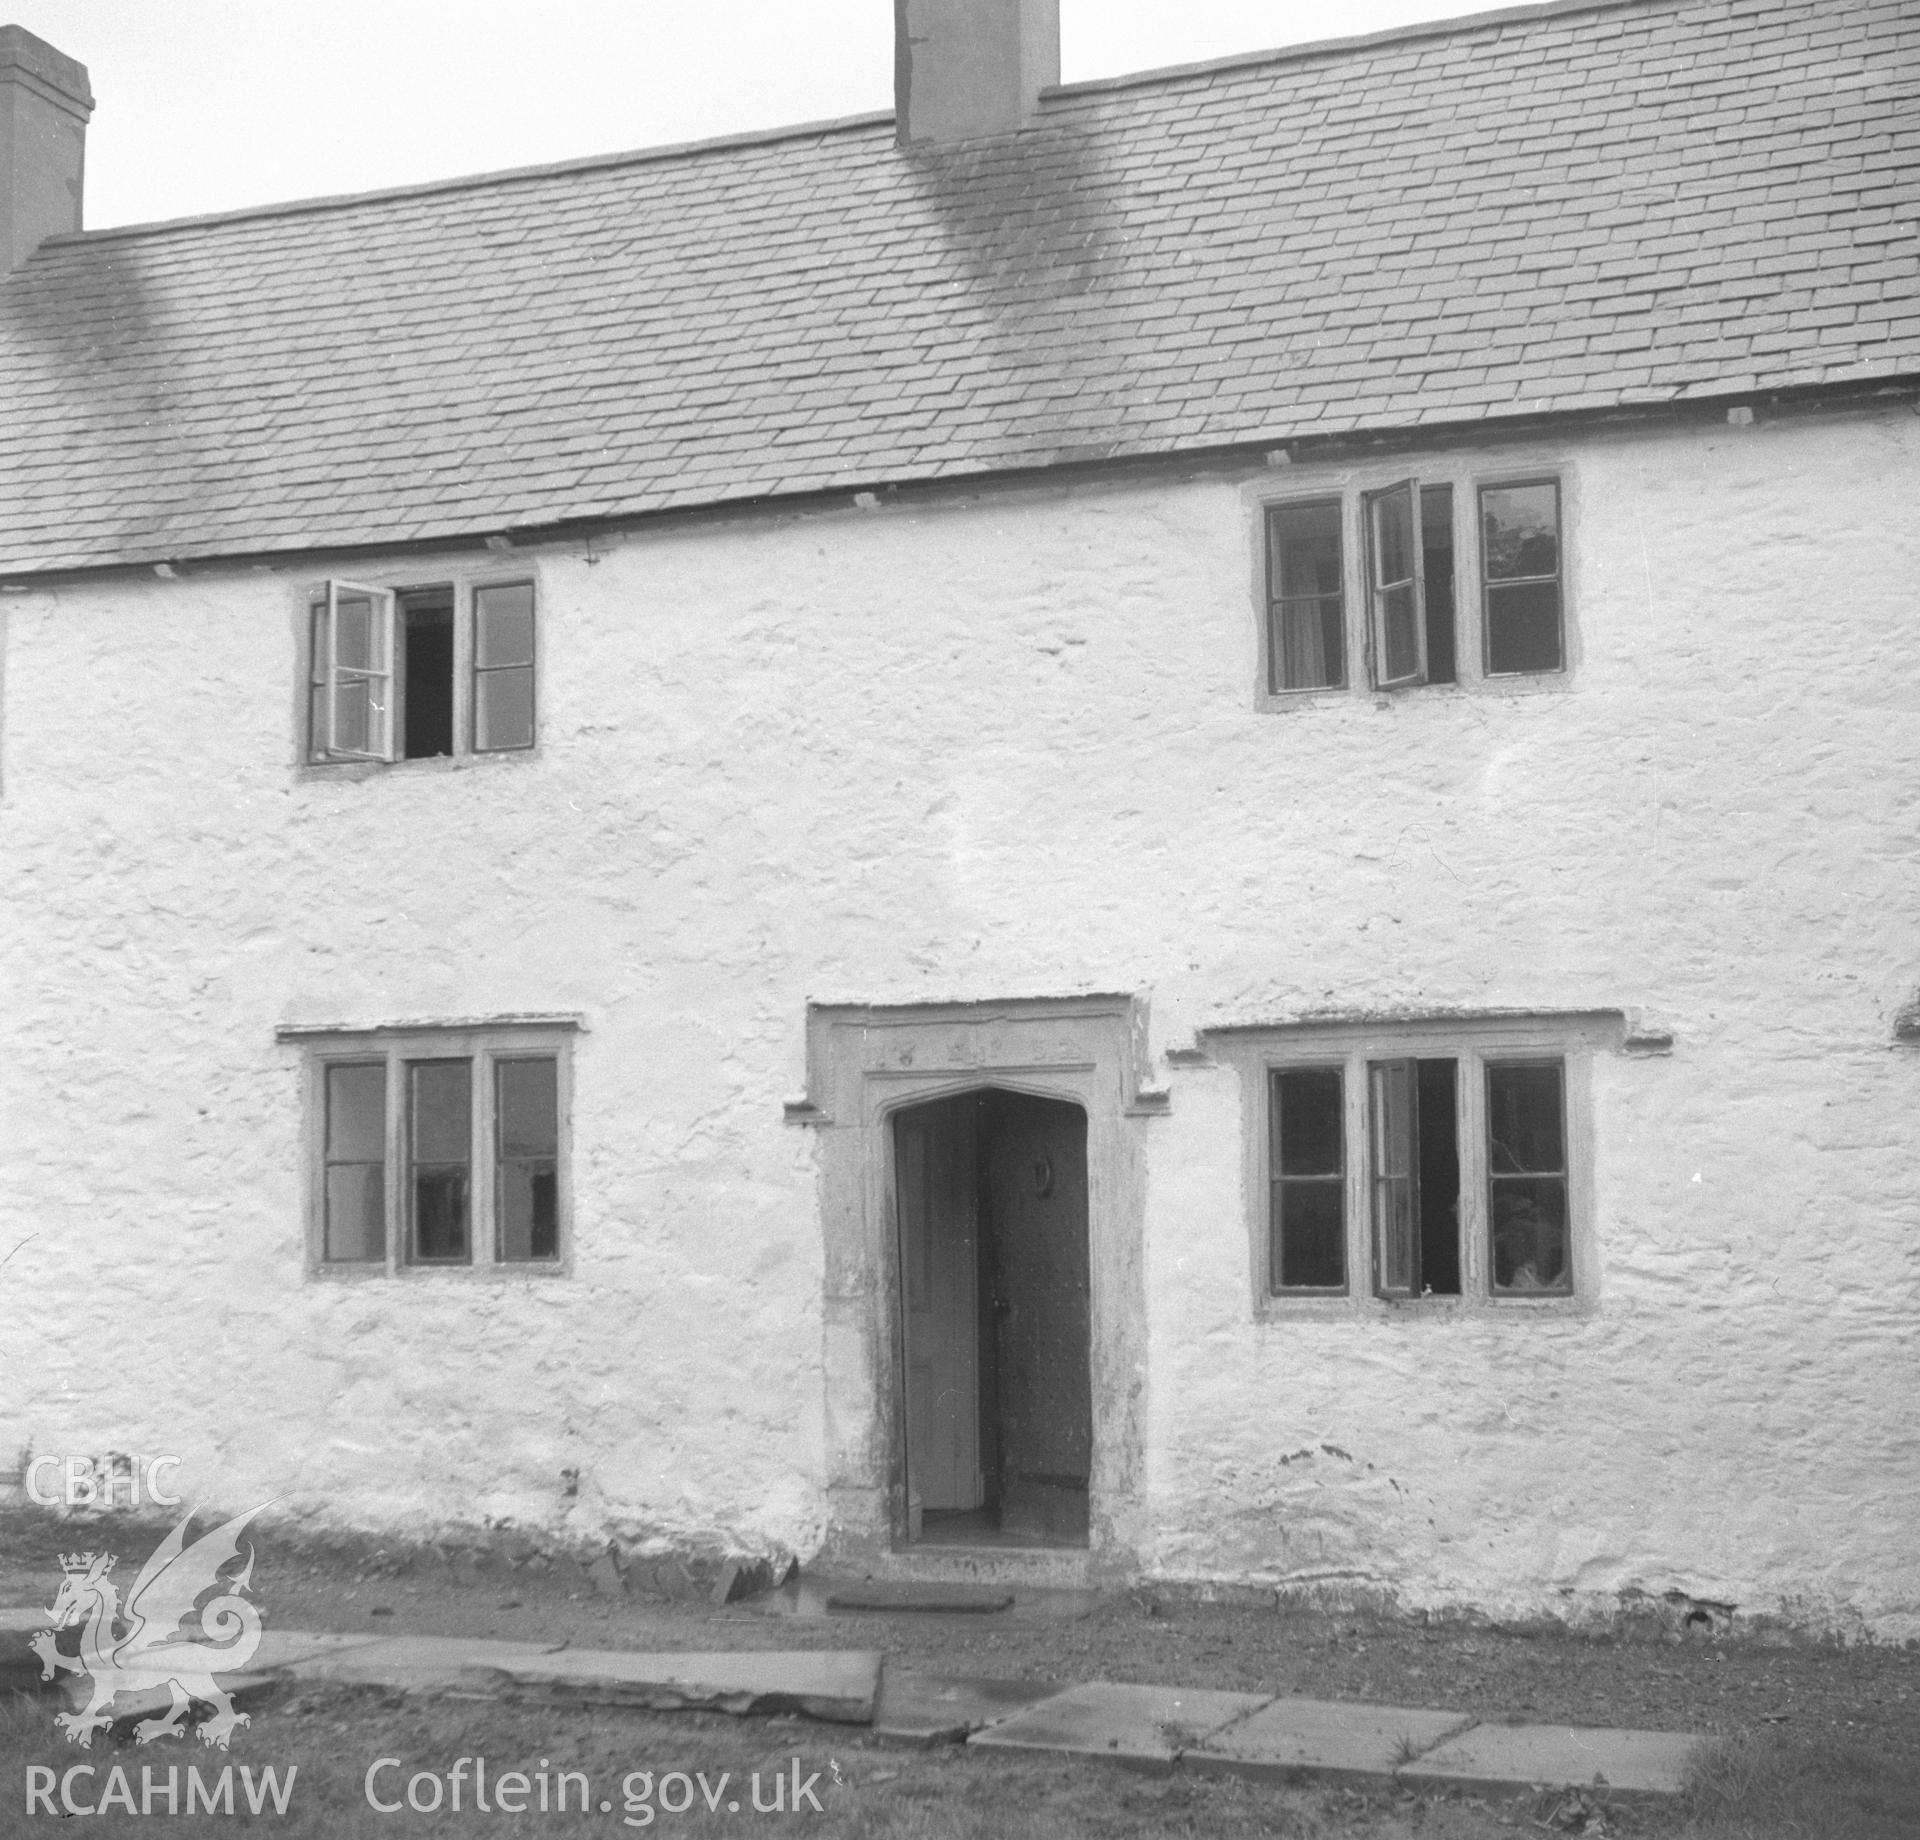 Digital copy of a black and white nitrate negative showing front elevation of Penyrorsedd Farmhouse.